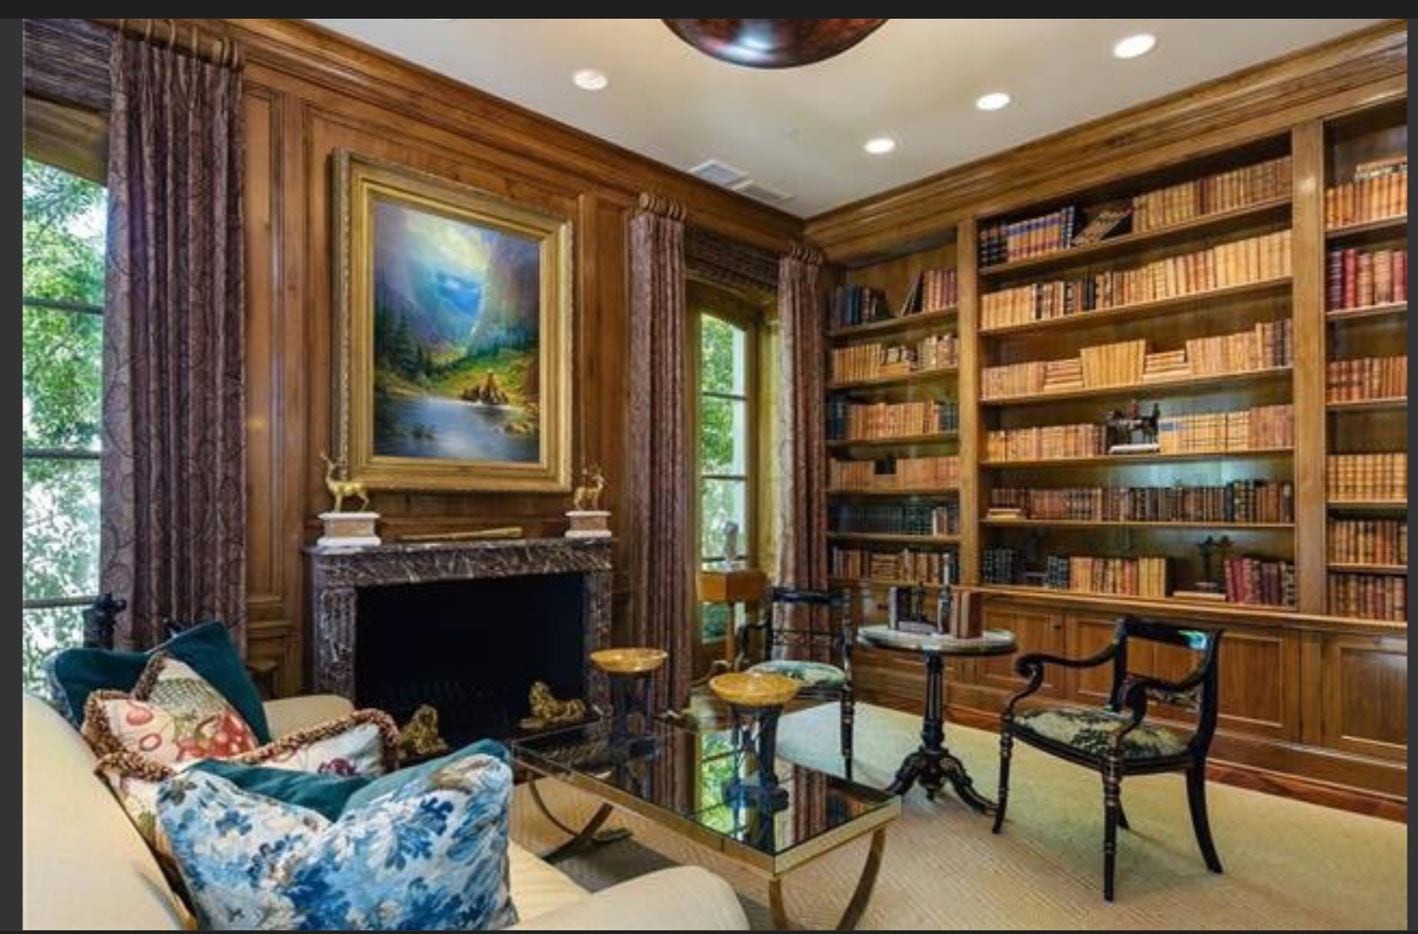 The library in T. Boone Pickens house.